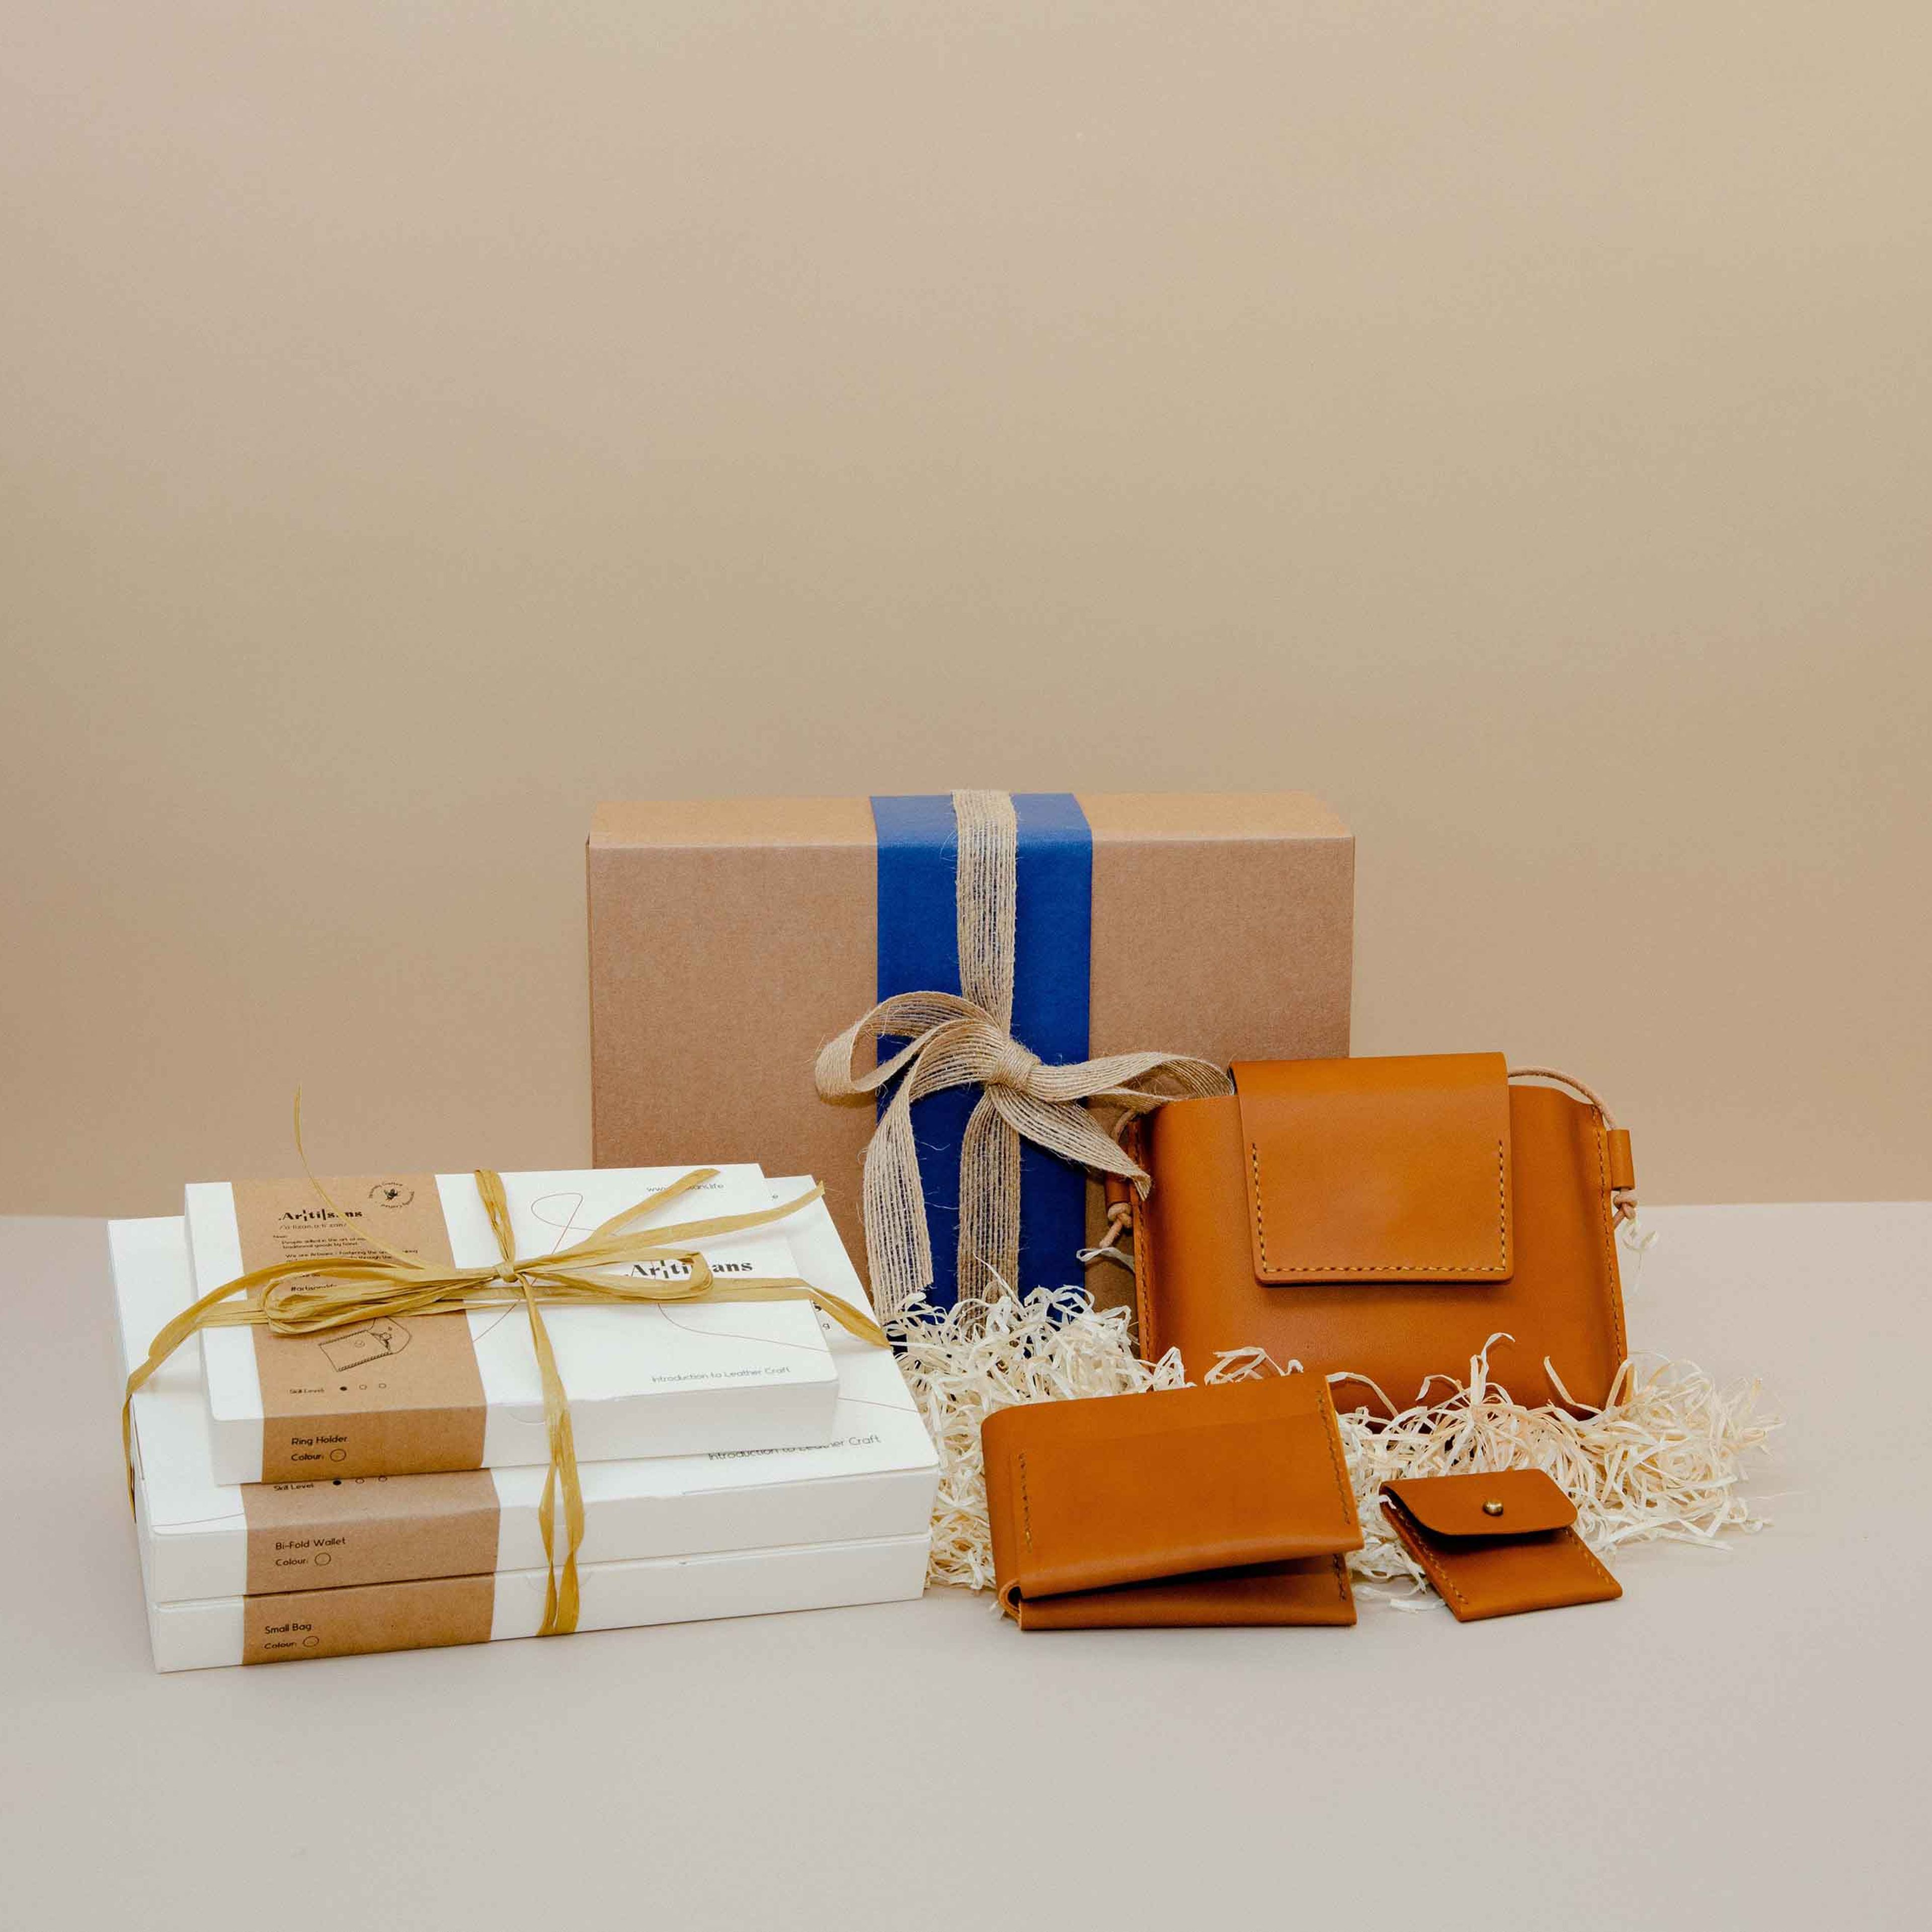 Christmas Gift bundle - D.I.Y Leather Small bag, D.I.Y Leather Bi-fold wallet, D.I.Y Leather Ring case (Includes 3 D.I.Y Leather Keyrings)